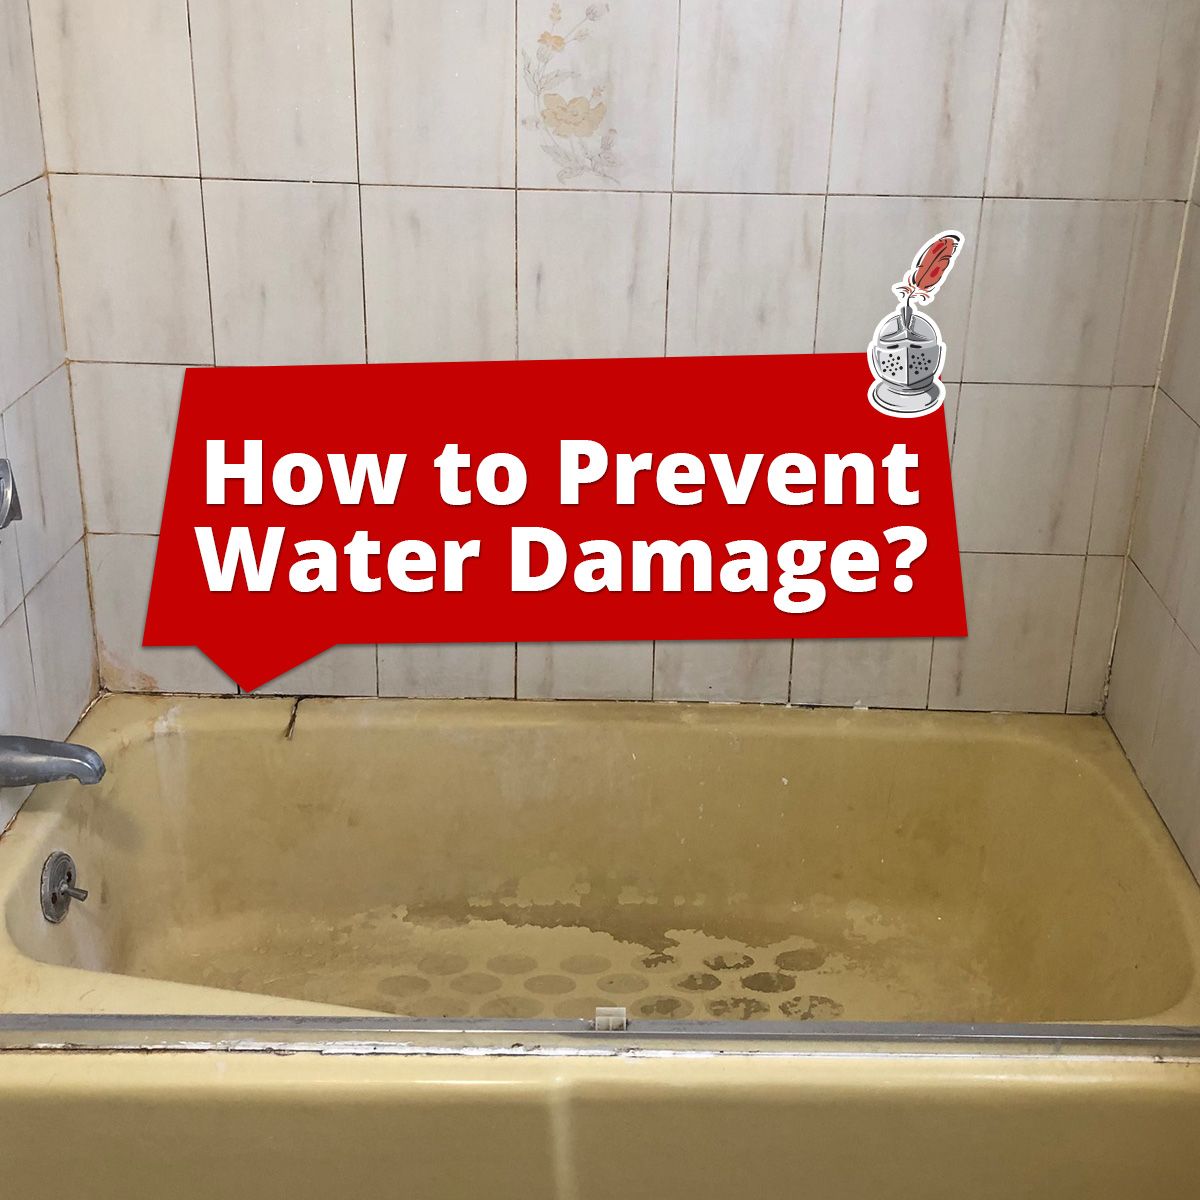 How to Prevent Water Damage?